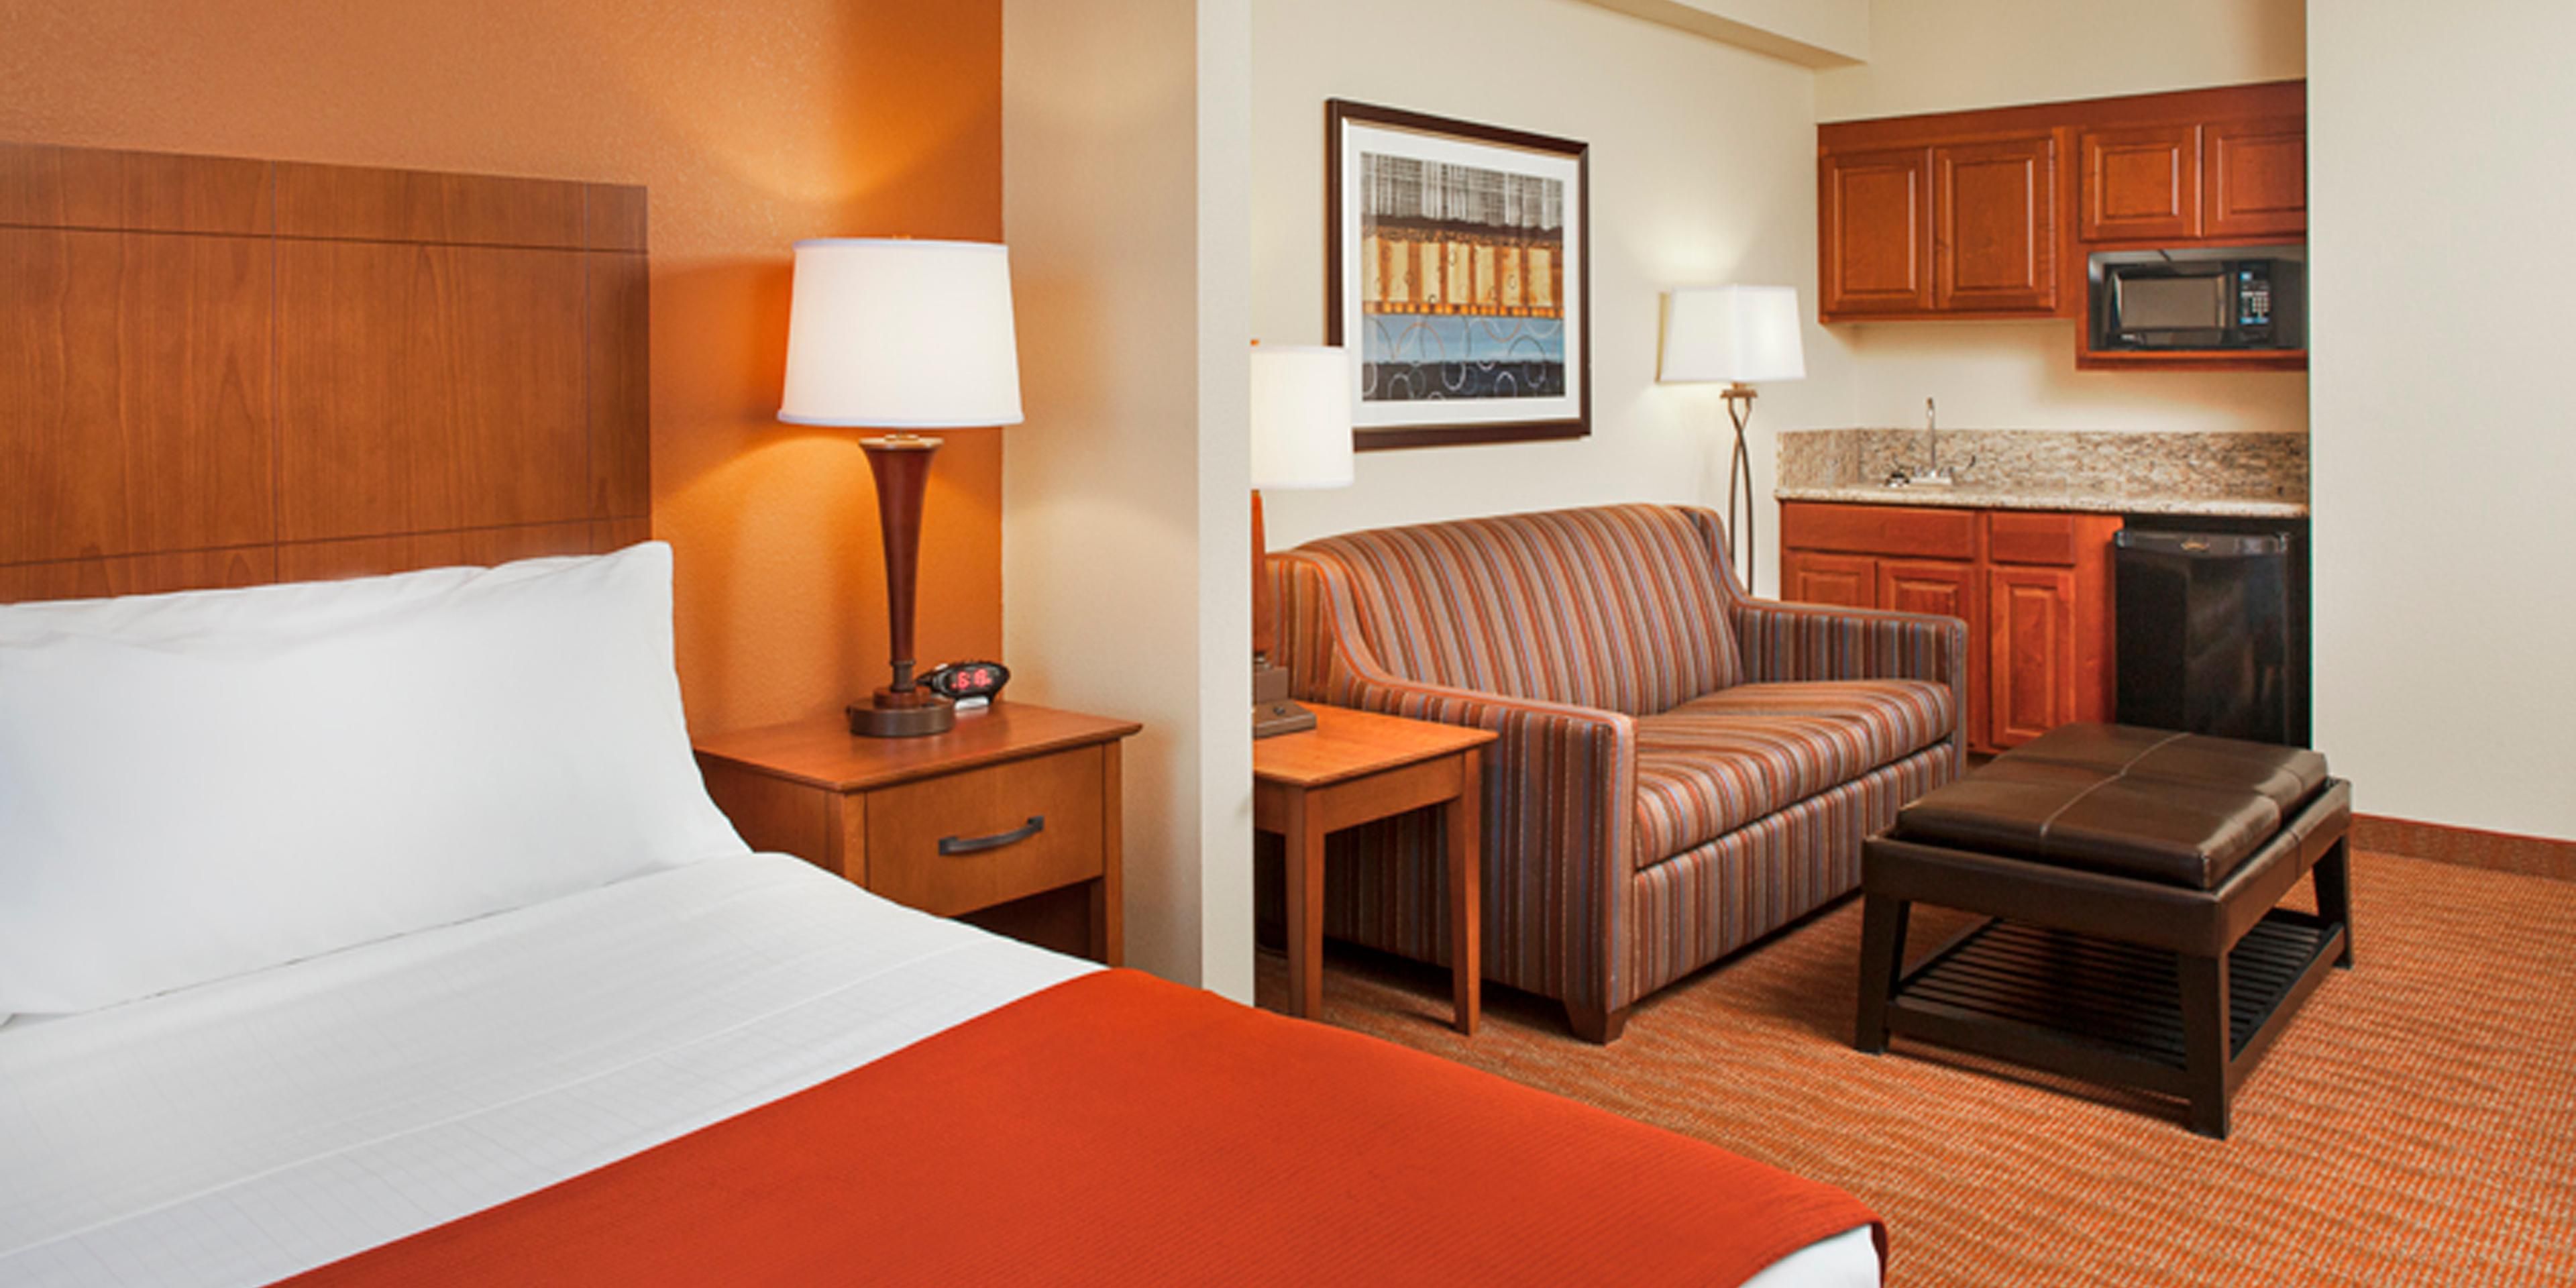 IHG has a long-standing commitment to rigorous cleaning procedures. This IHG Way of Clean program is now being expanded with additional COVID-19 protocols and best practices. Click to learn about our clean standards.